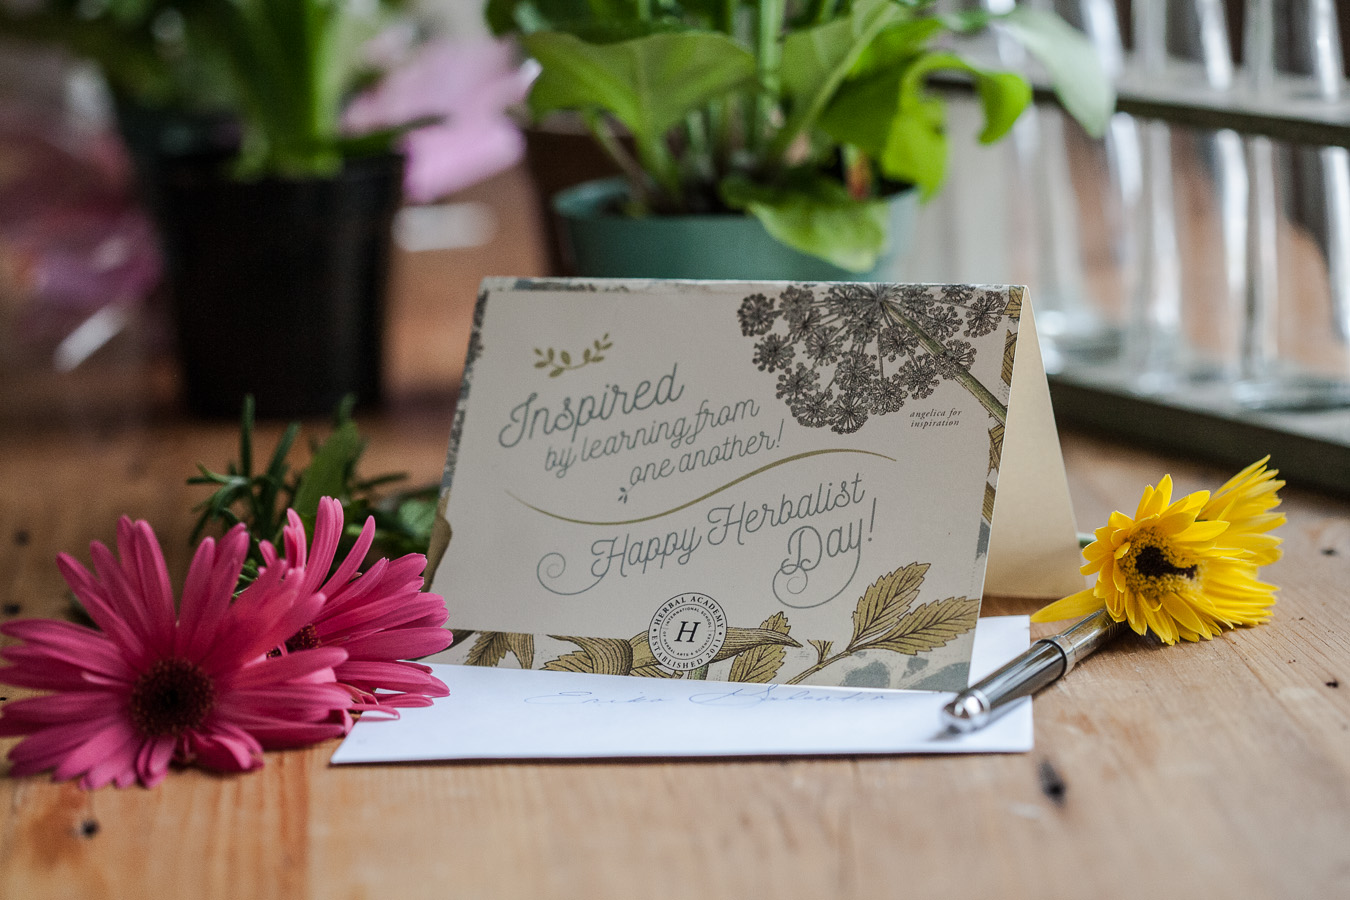 Celebrate Herbalist Day by Honoring Your Teachers – FREE card downloads! | Herbal Academy | Thank An Herbalist Day, coming up on April 17th, is the perfect opportunity to reach out to thank an herbalist who has assisted, taught, or inspired you in some way! 